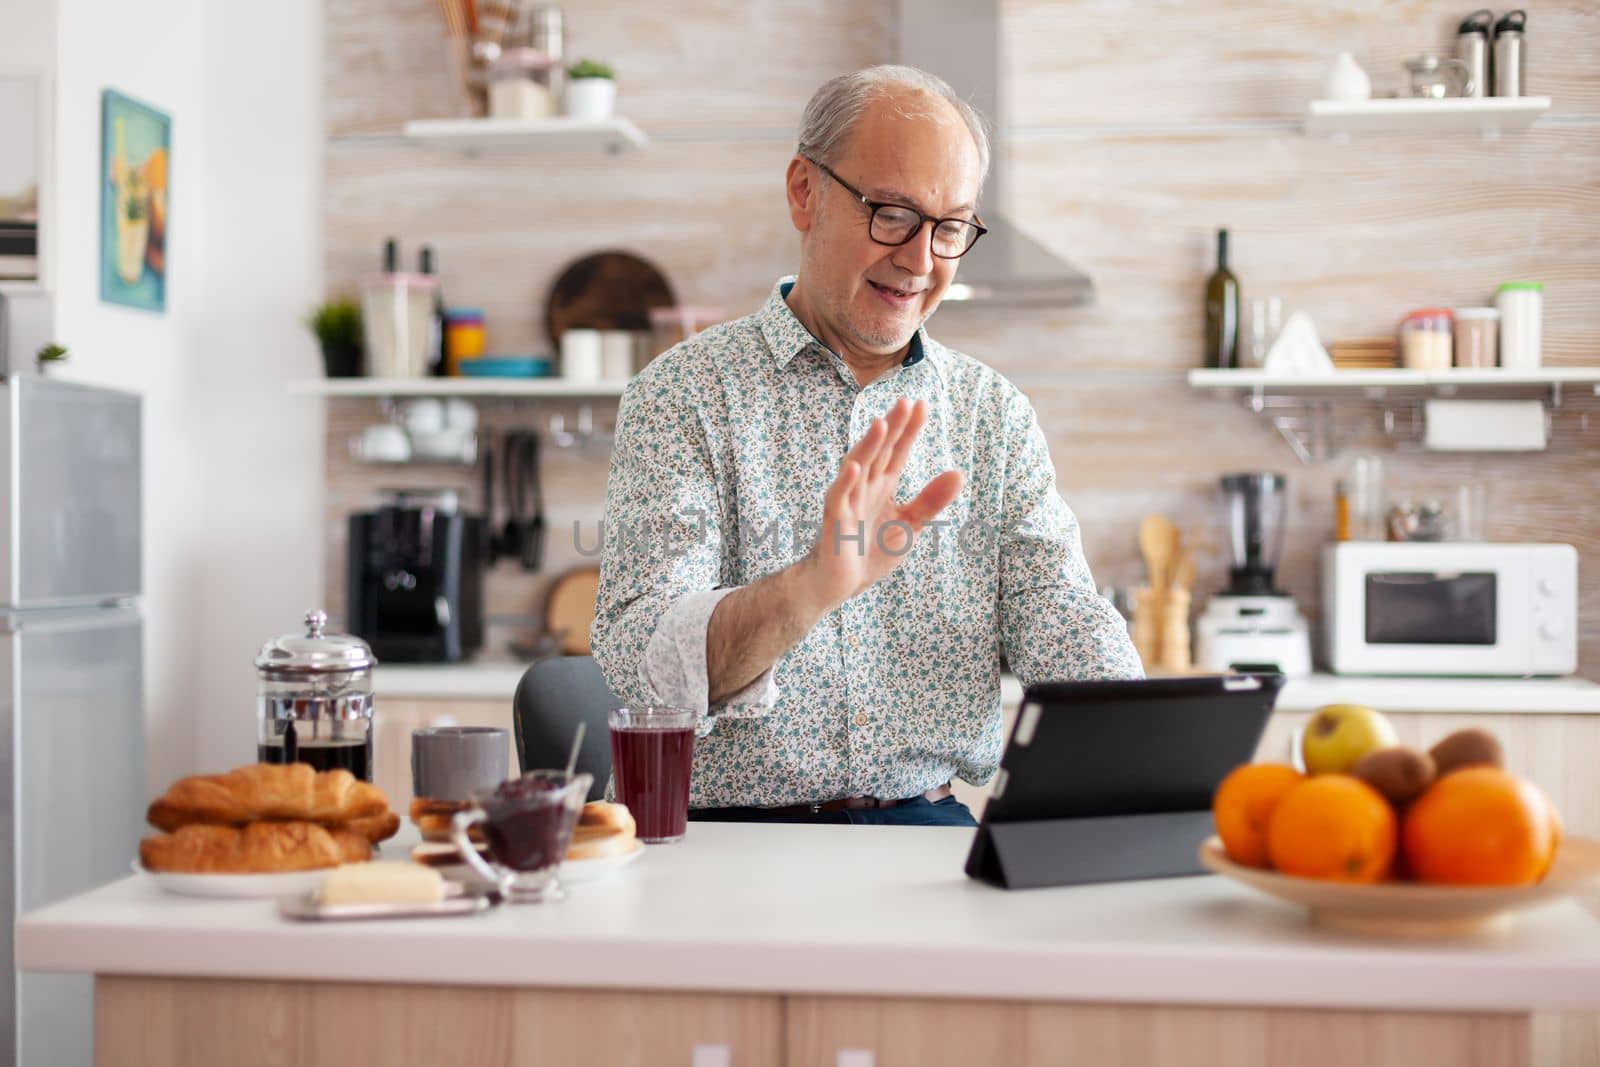 Mature man waving while having a conversation during video call in kitchen by DCStudio